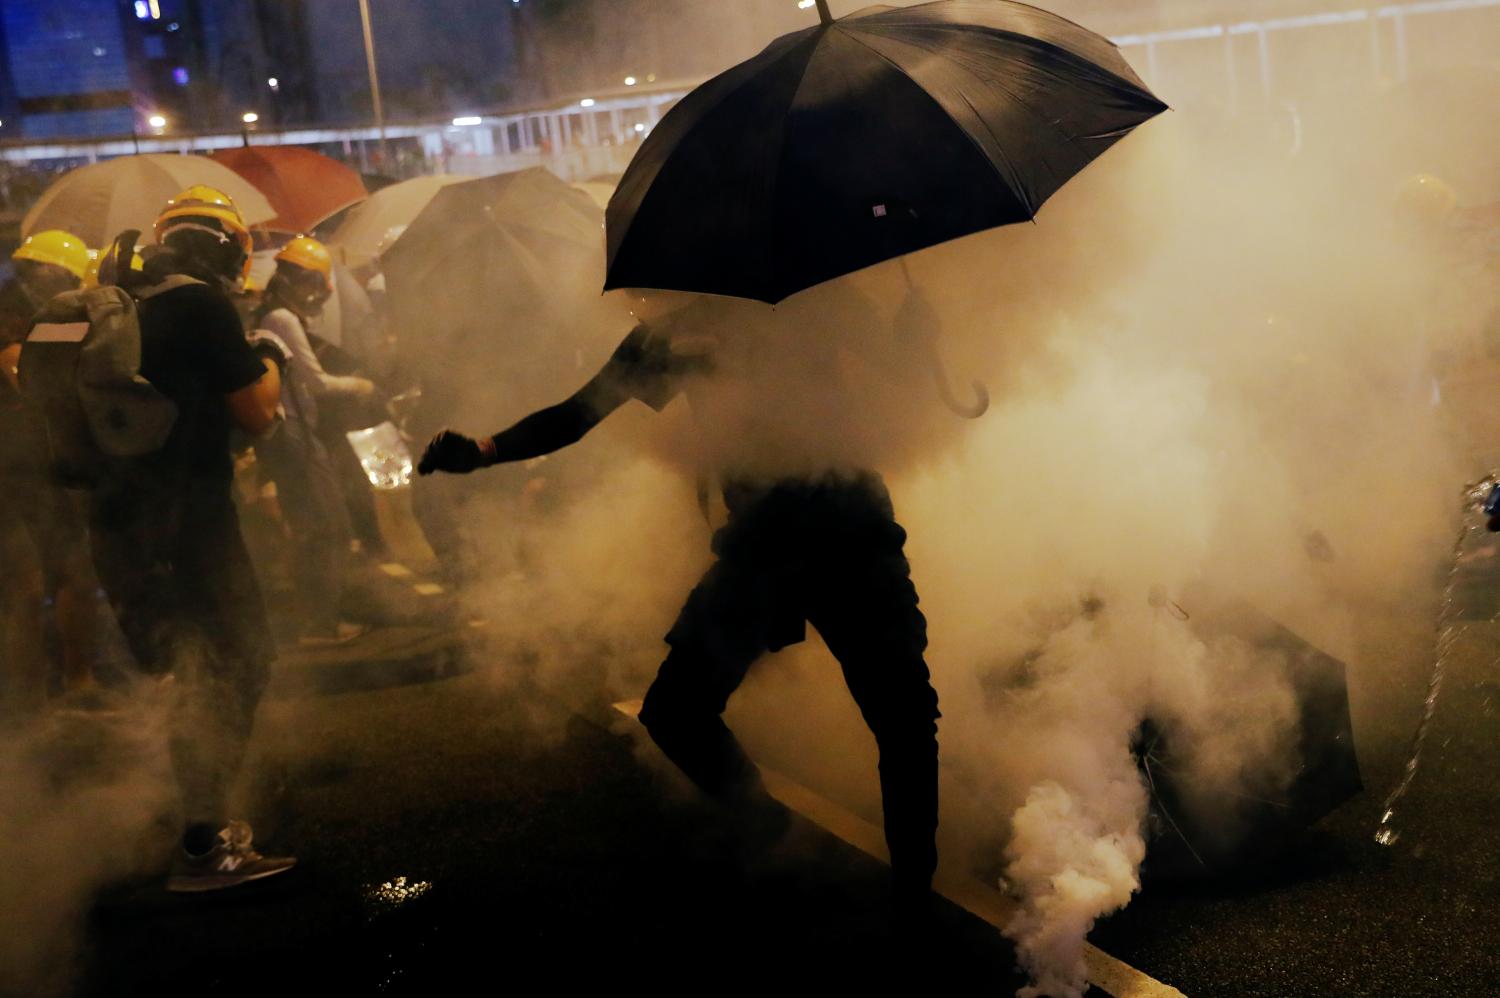 Pro-democracy protesters use umbrellas to protect themselves from tear gas during a protest against police violence during previous marches, near China's Liaison Office, Hong Kong, China July 28, 2019. REUTERS/Tyrone Siu - RC1304E1DFD0